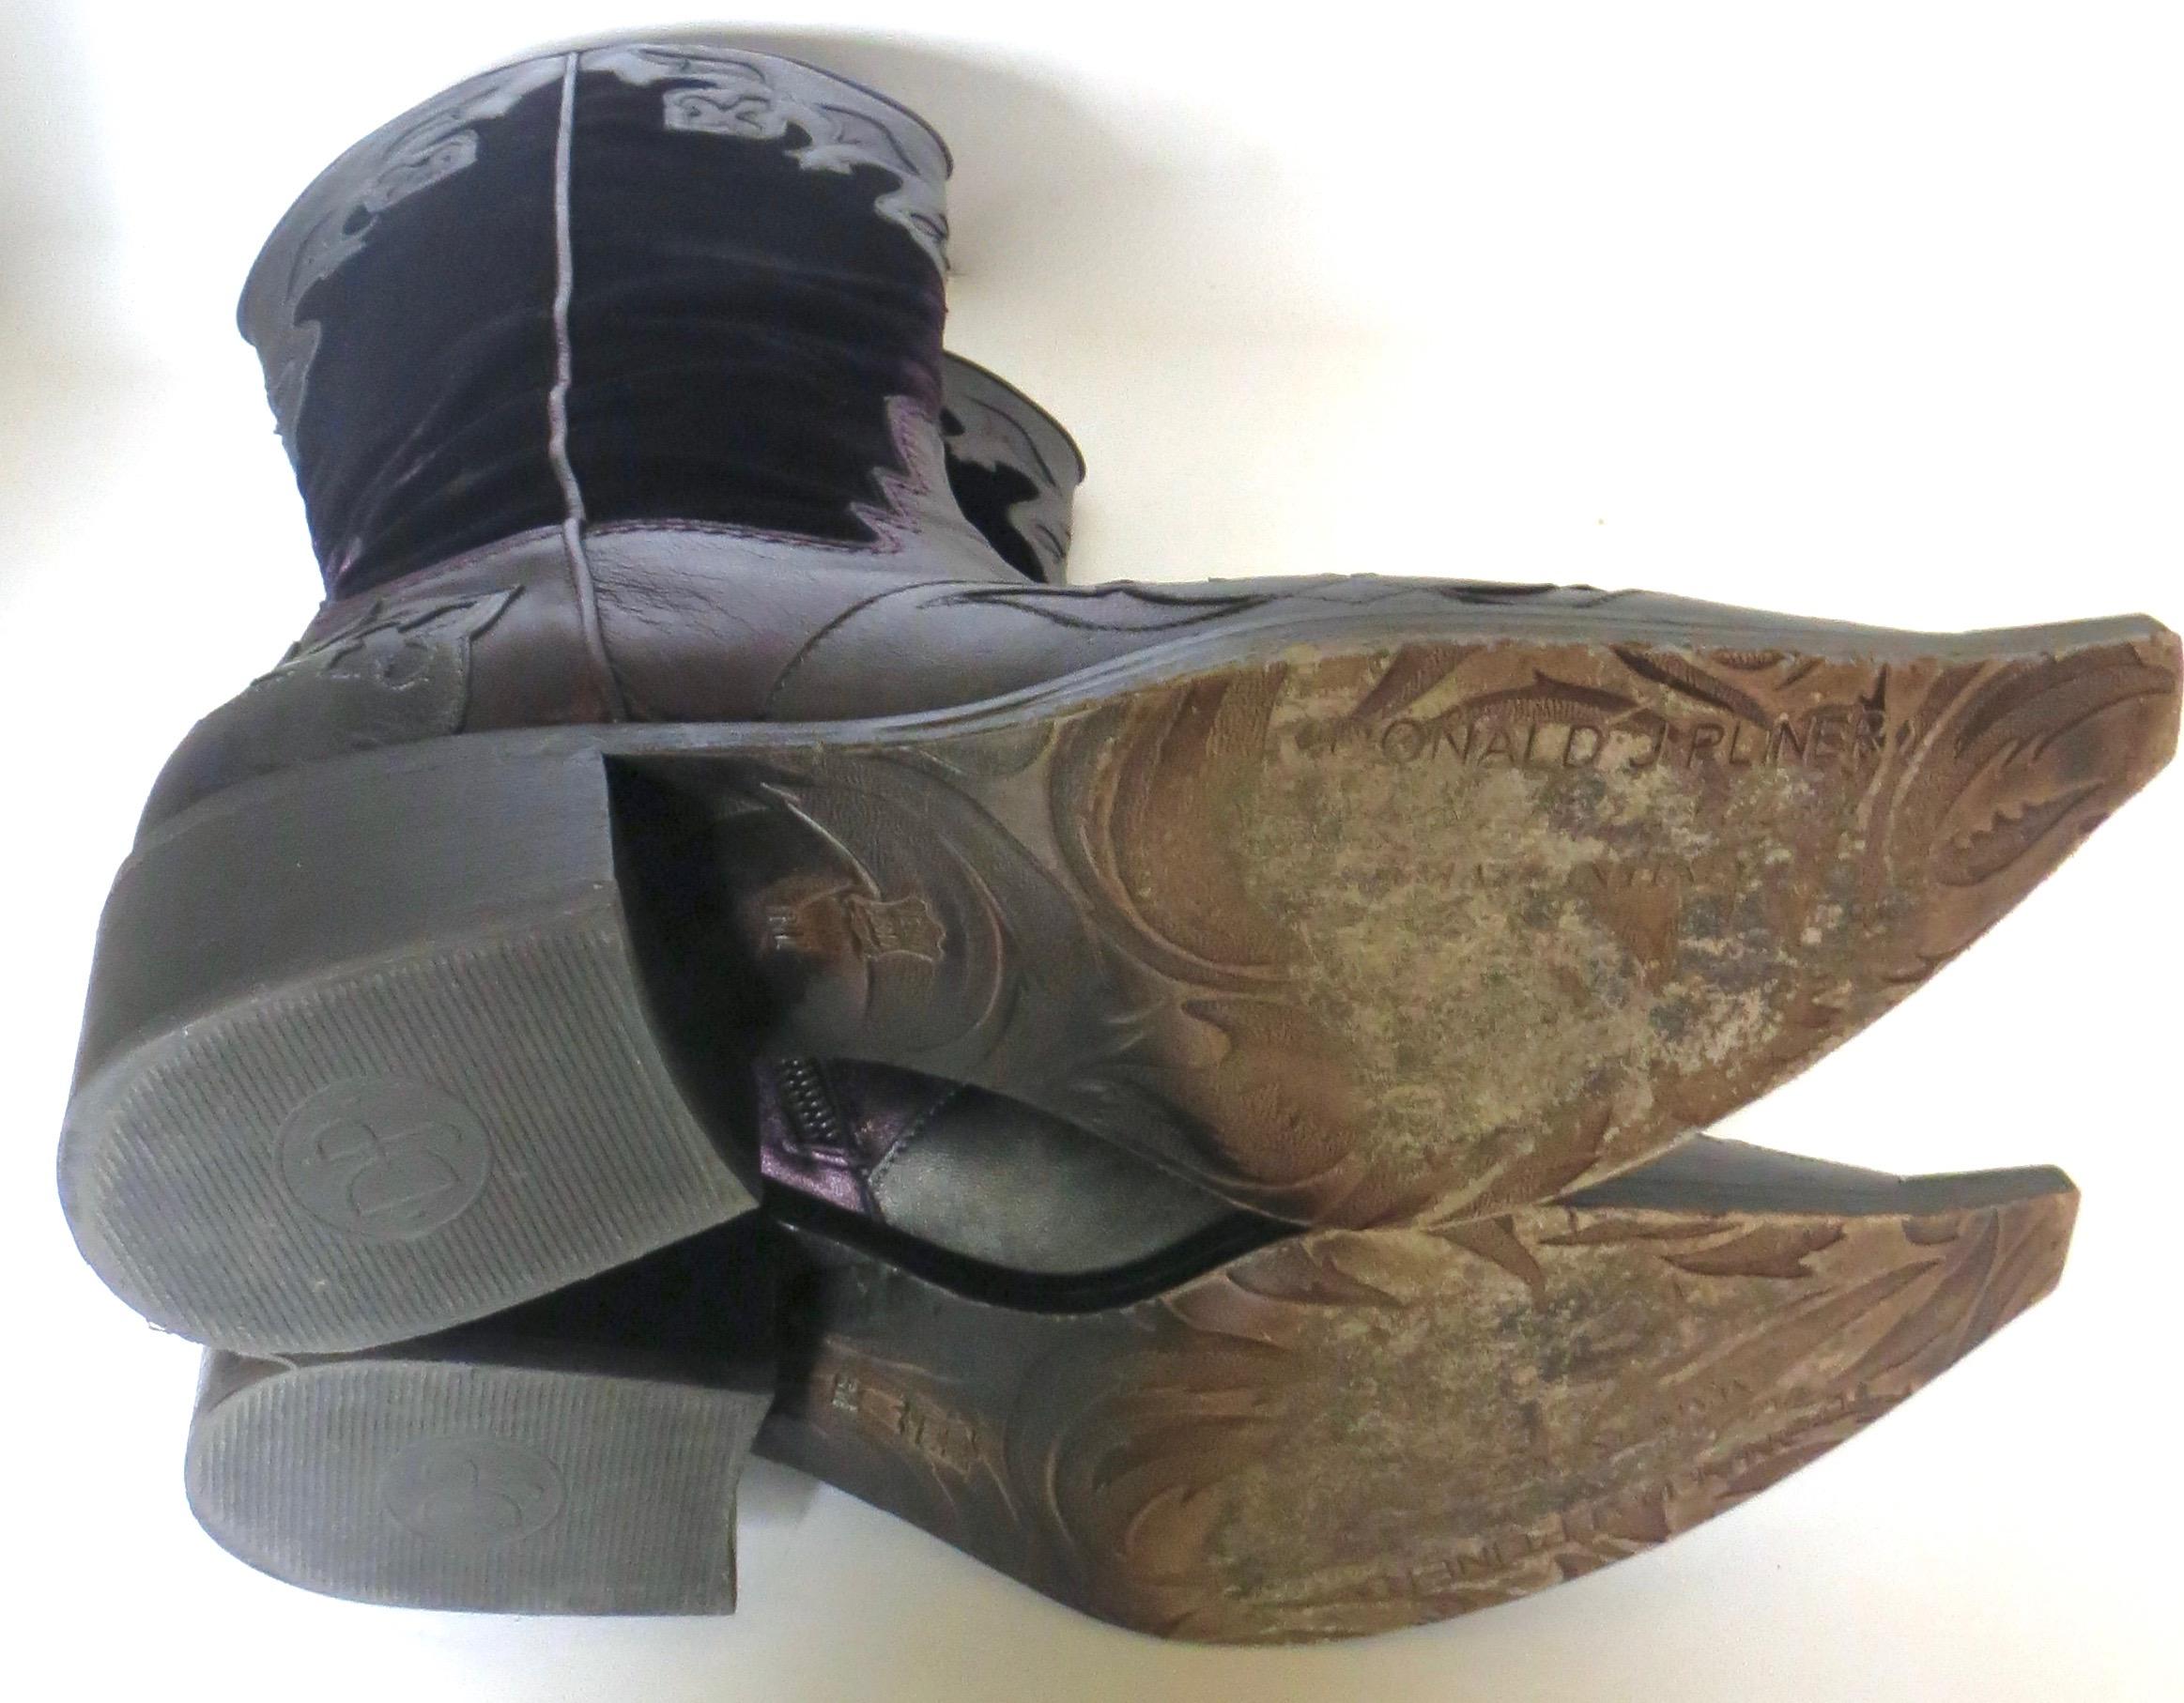 Donald J. Pliner Lady's Vintage Western Boots In Good Condition For Sale In Incline Village, NV